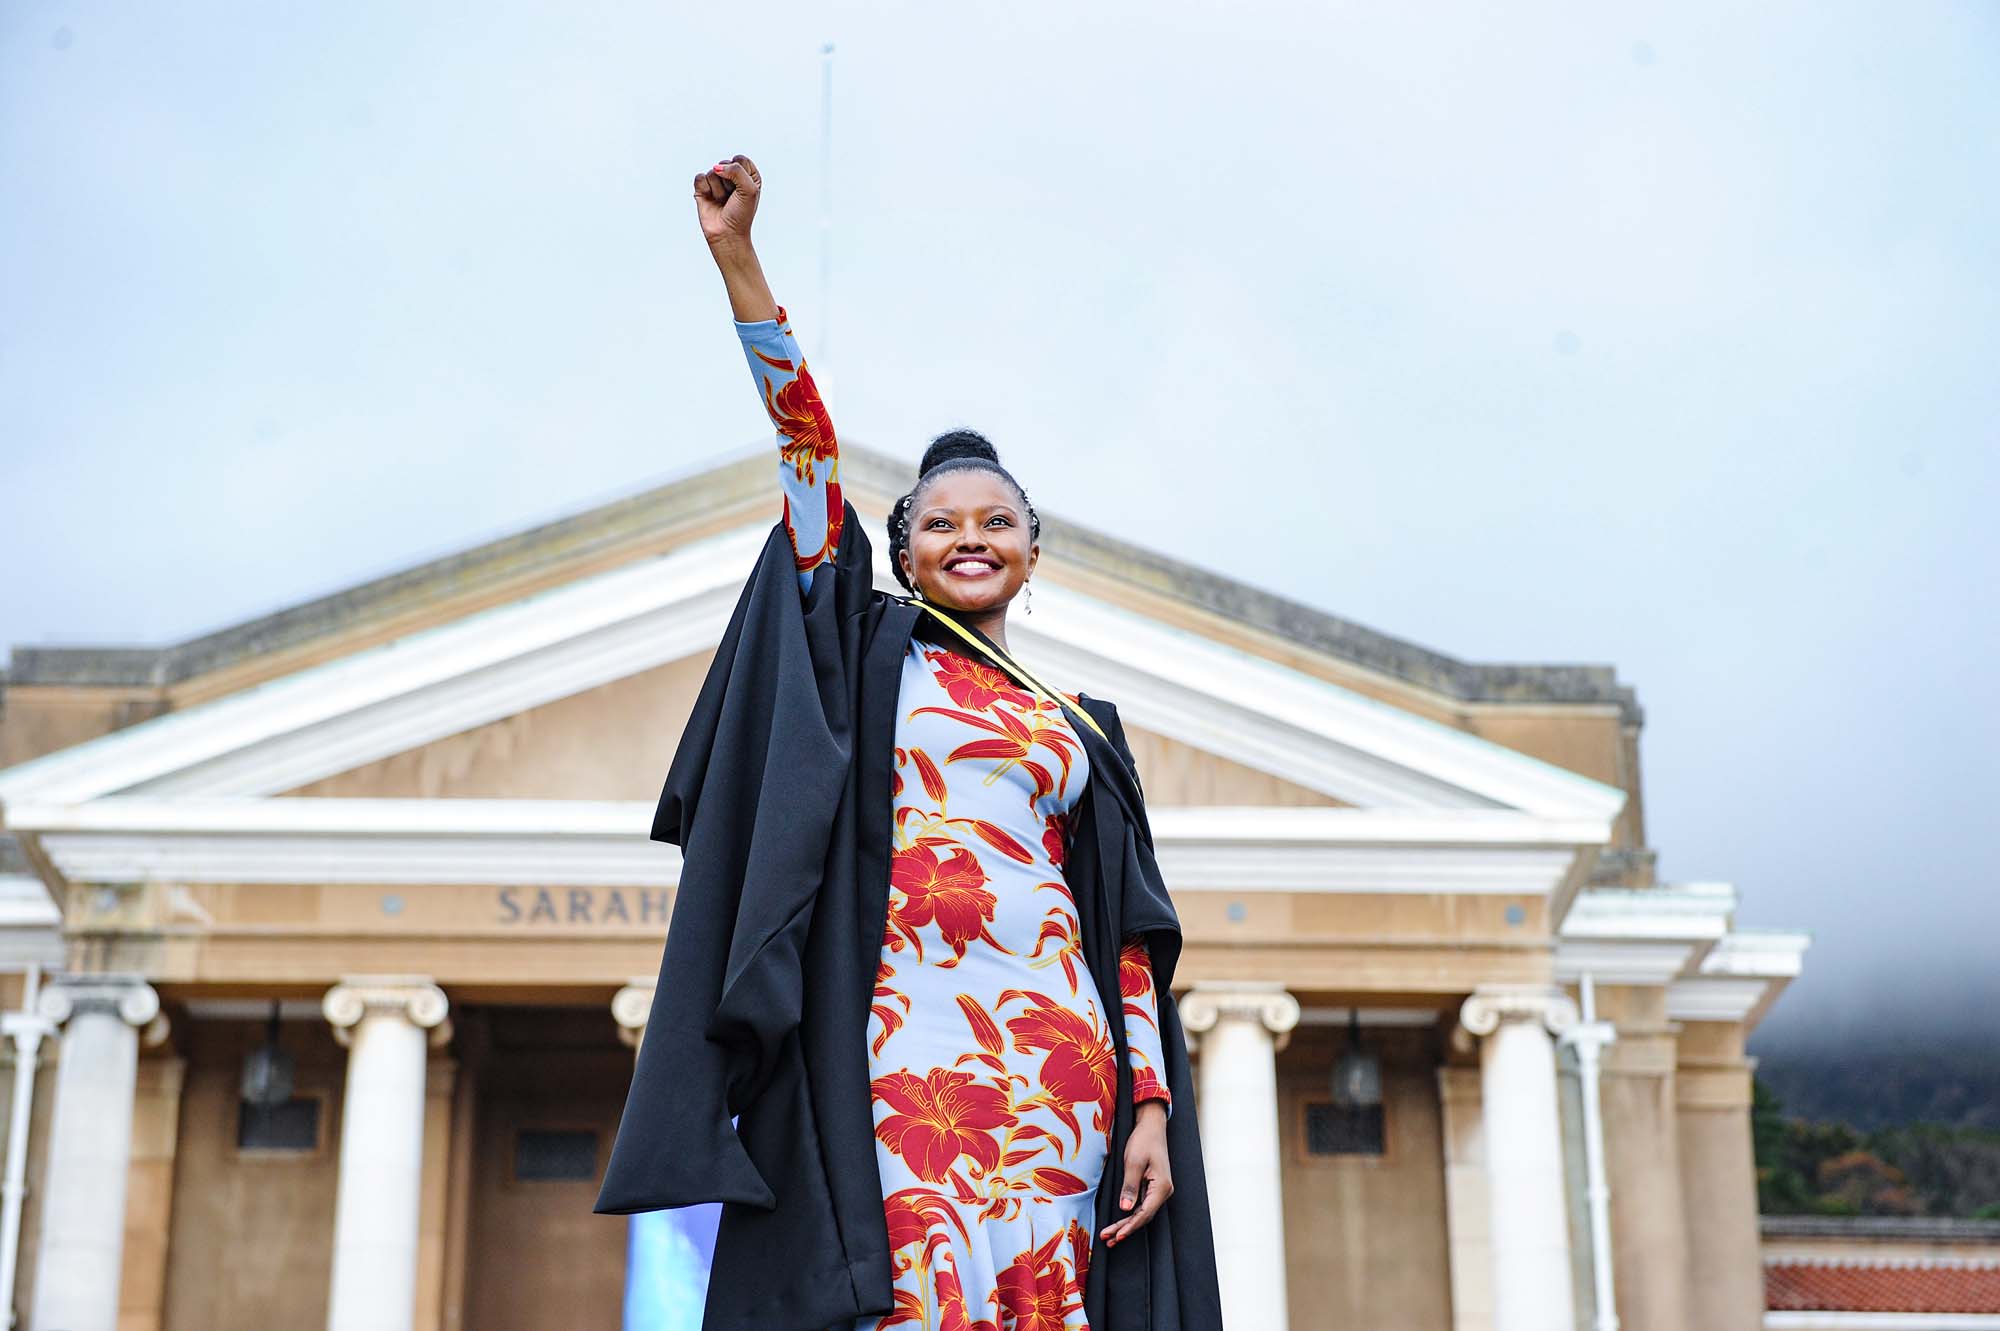 The Commerce and Humanities faculties had their graduation walk  of celebration on 13 December 2021 on the steps in front of the Sarah Baartman Hall as a ceremonial and symbolic gesture of their graduation, recognising that COVID-19 has changed the university&rsquo;s usual ways of celebrating graduation.